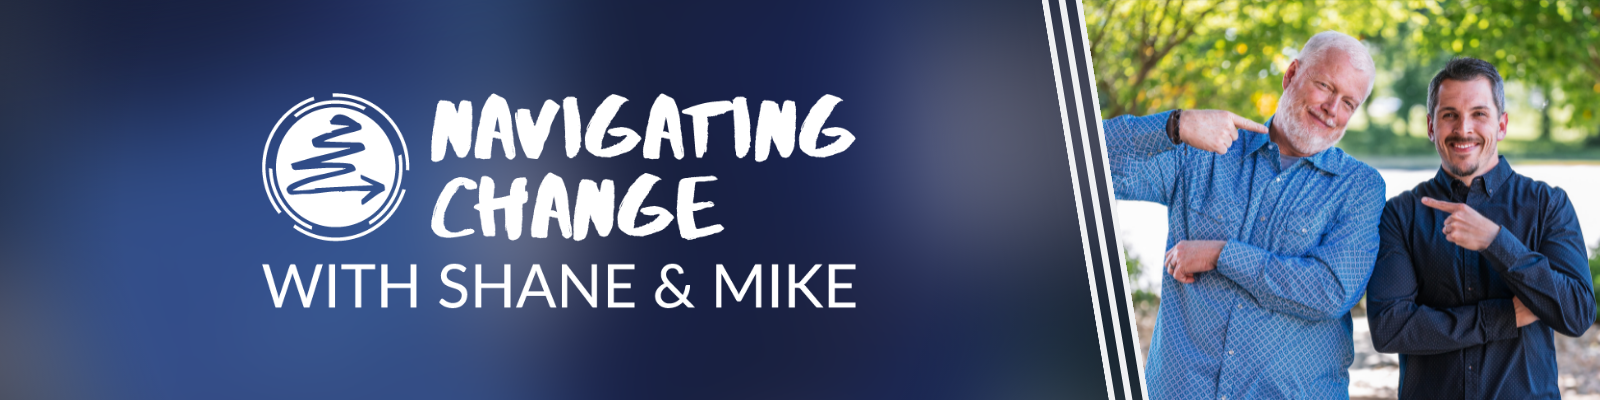 Navigating Change With Shane and Mike